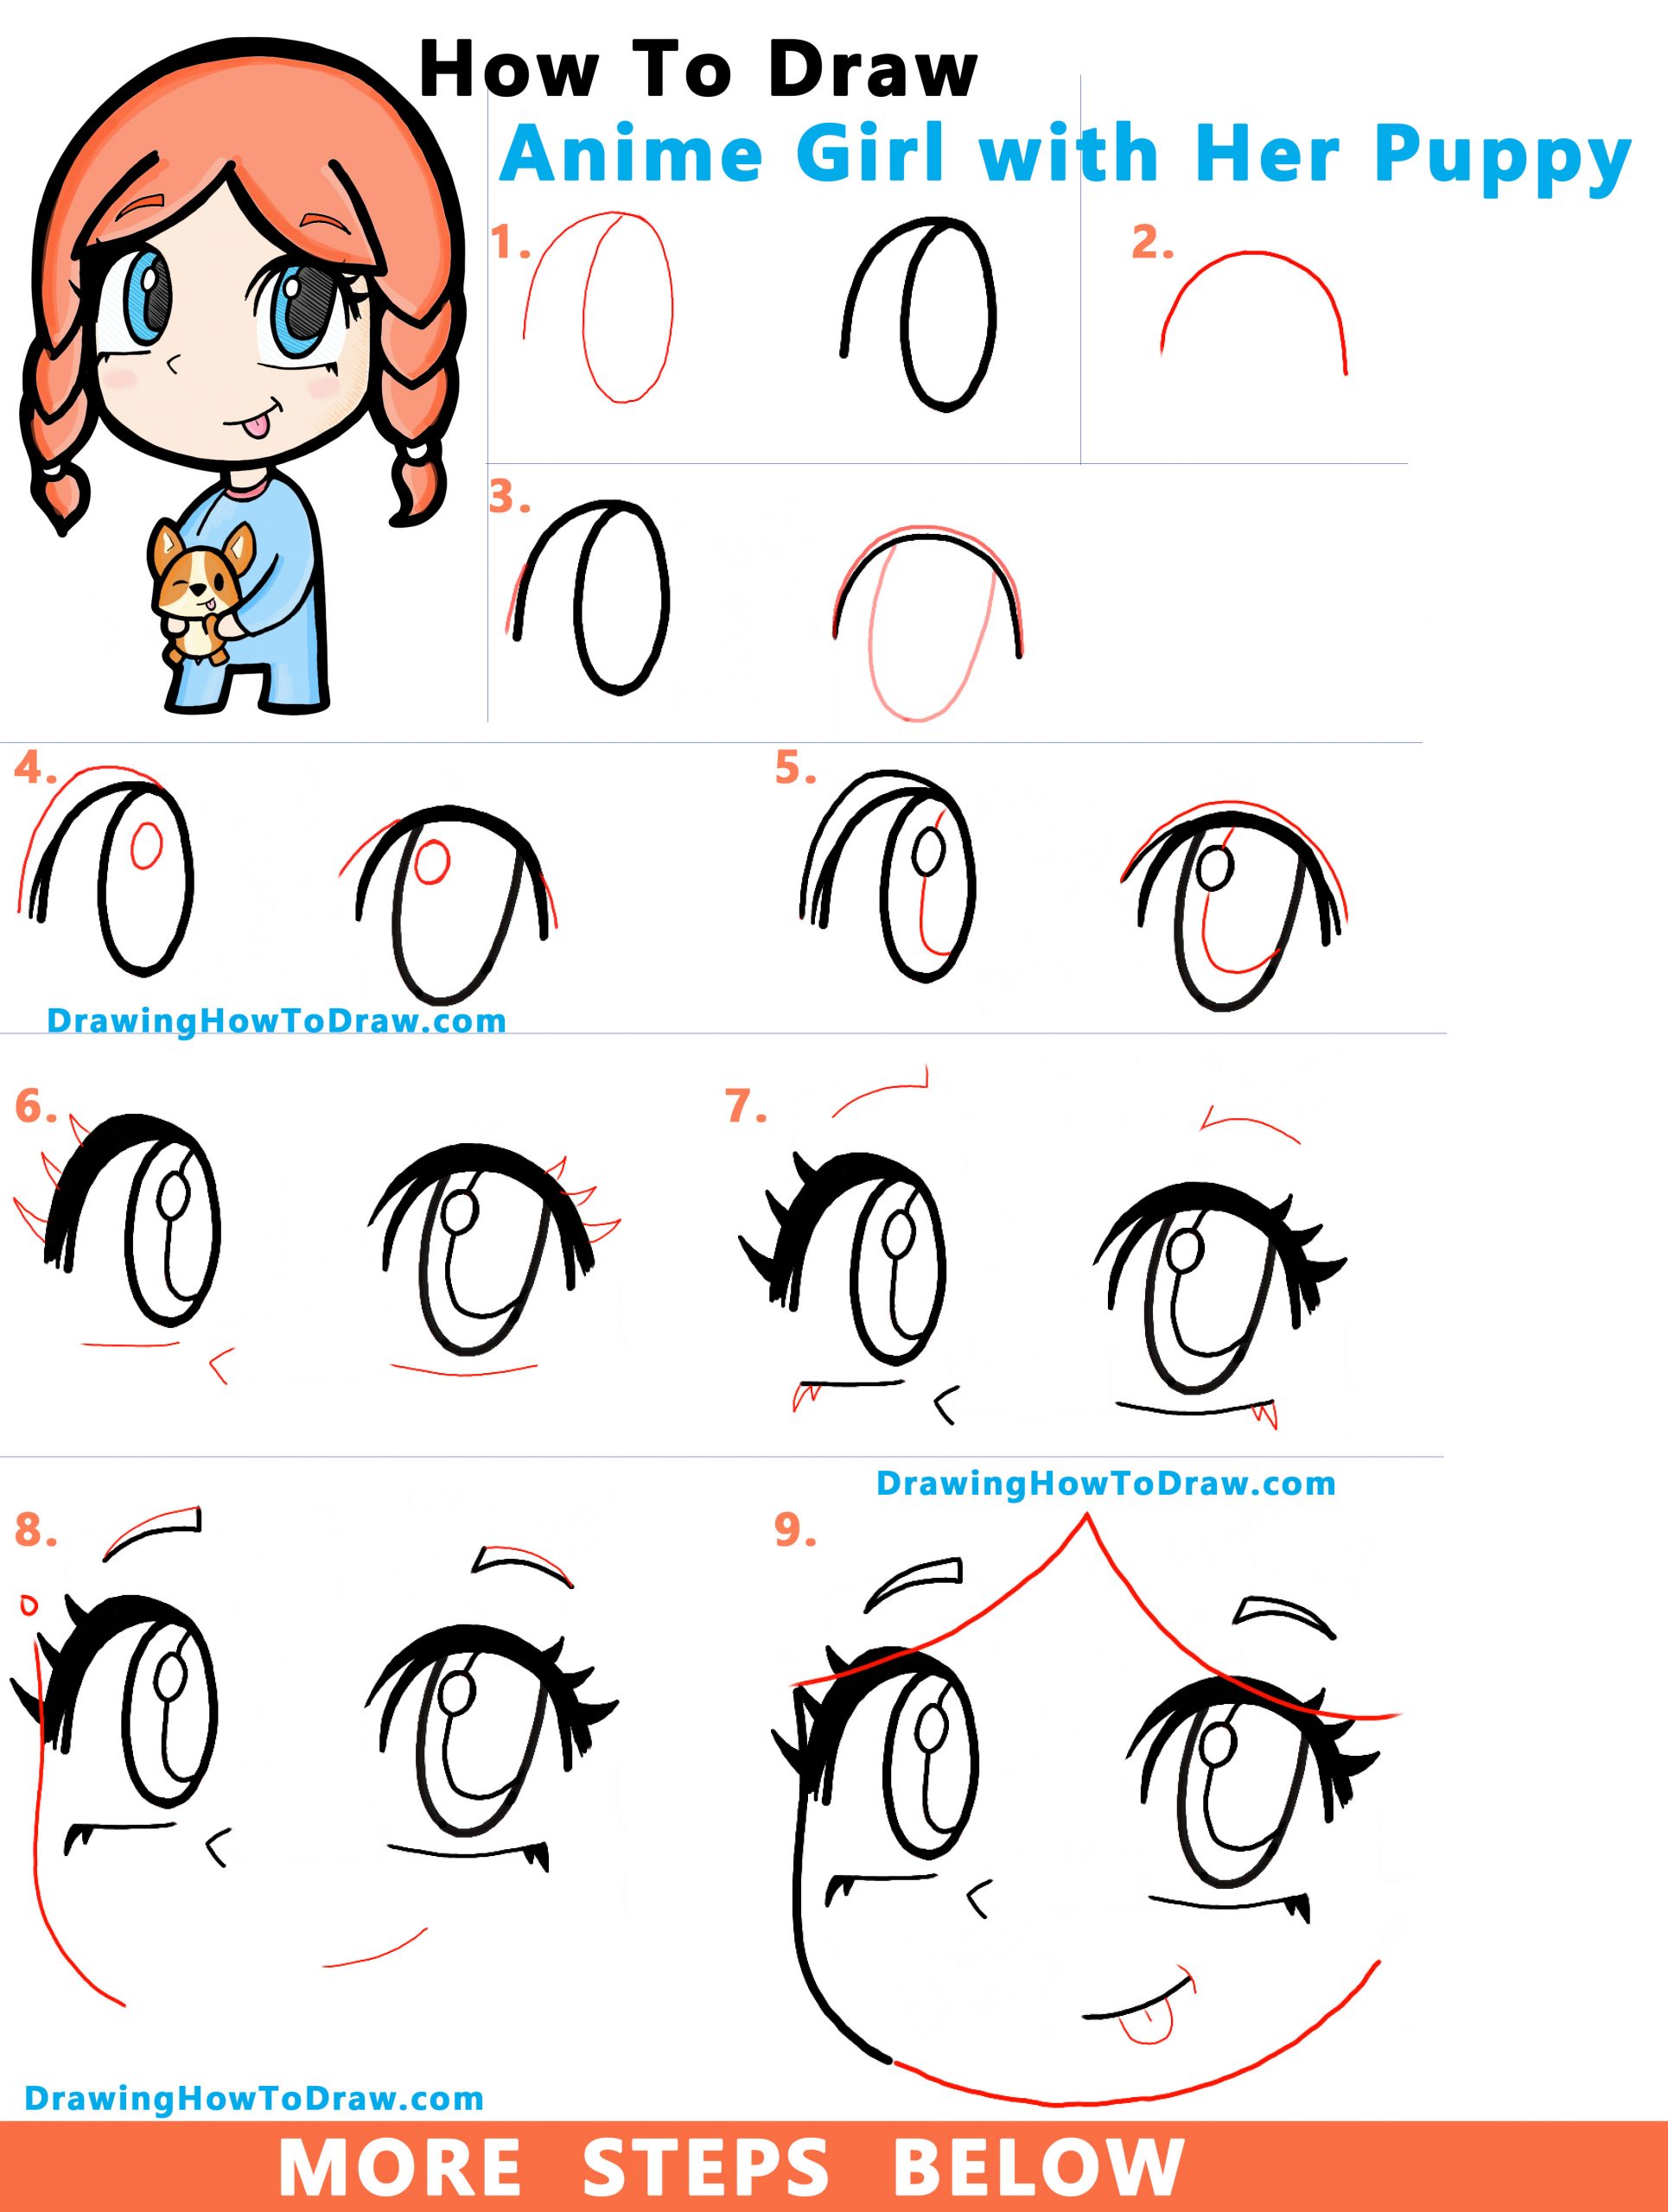 How to Draw Anime / Manga / Chibi Girl with her Puppy How to